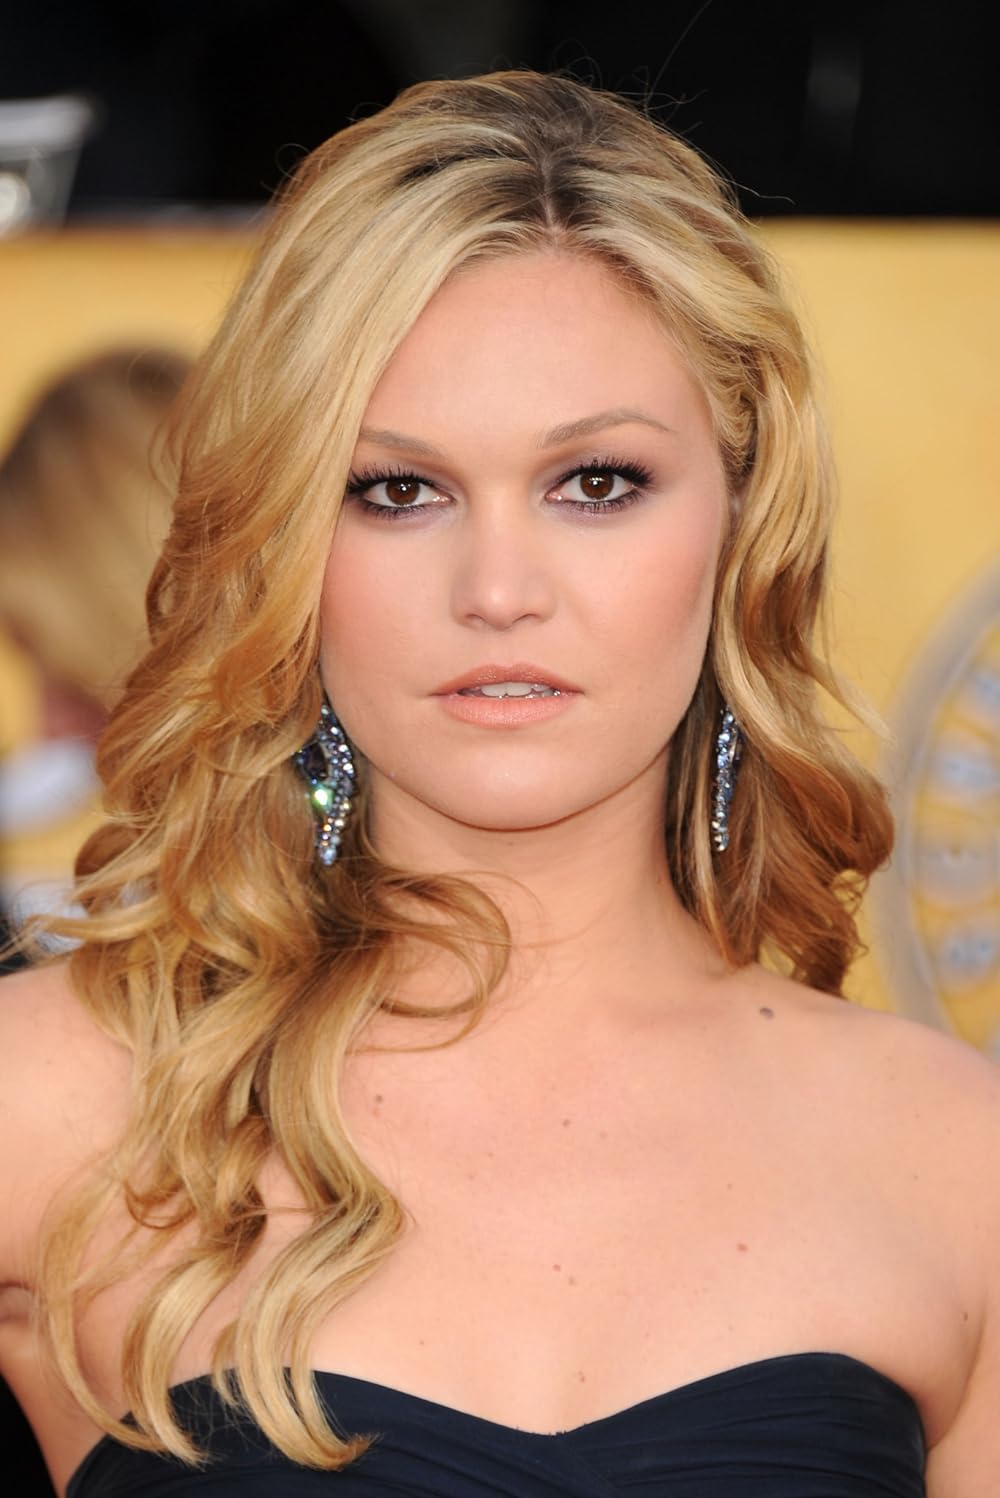 becky lecompte recommends julia stiles topless pic